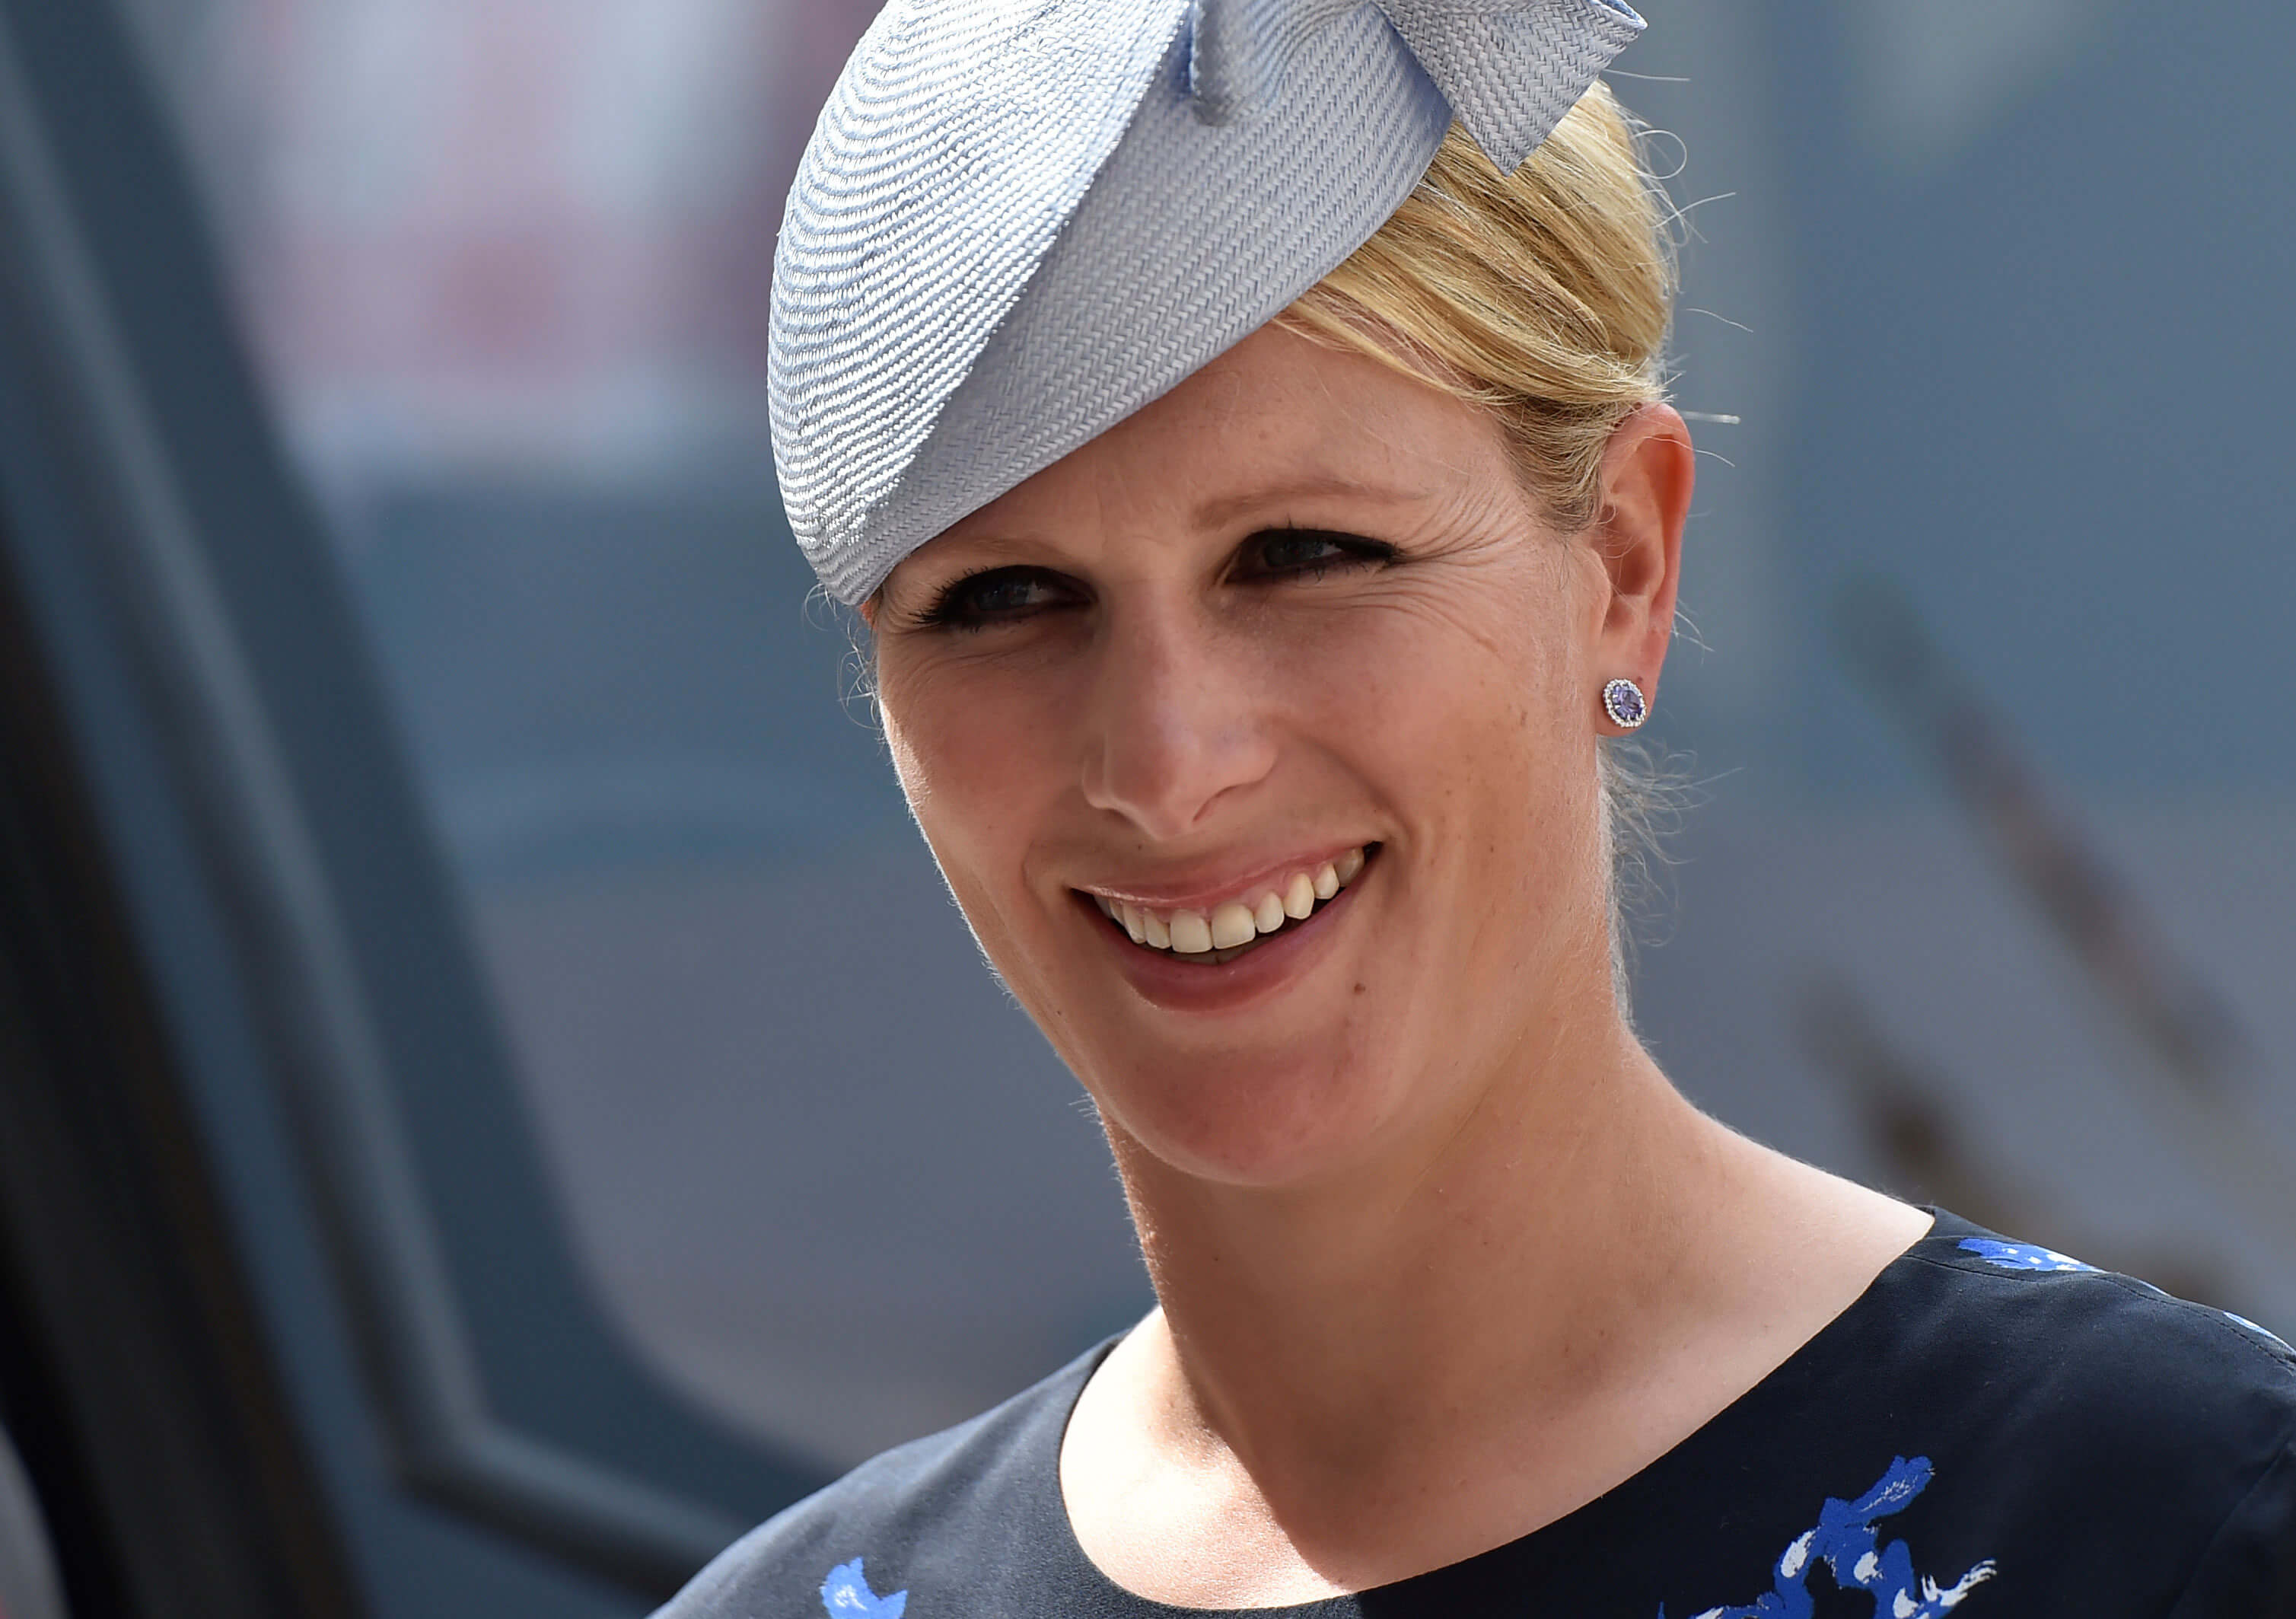 49 Hot Pictures Of Zara Phillips Which Will Make You Want To Jump Into Bed With Her | Best Of Comic Books